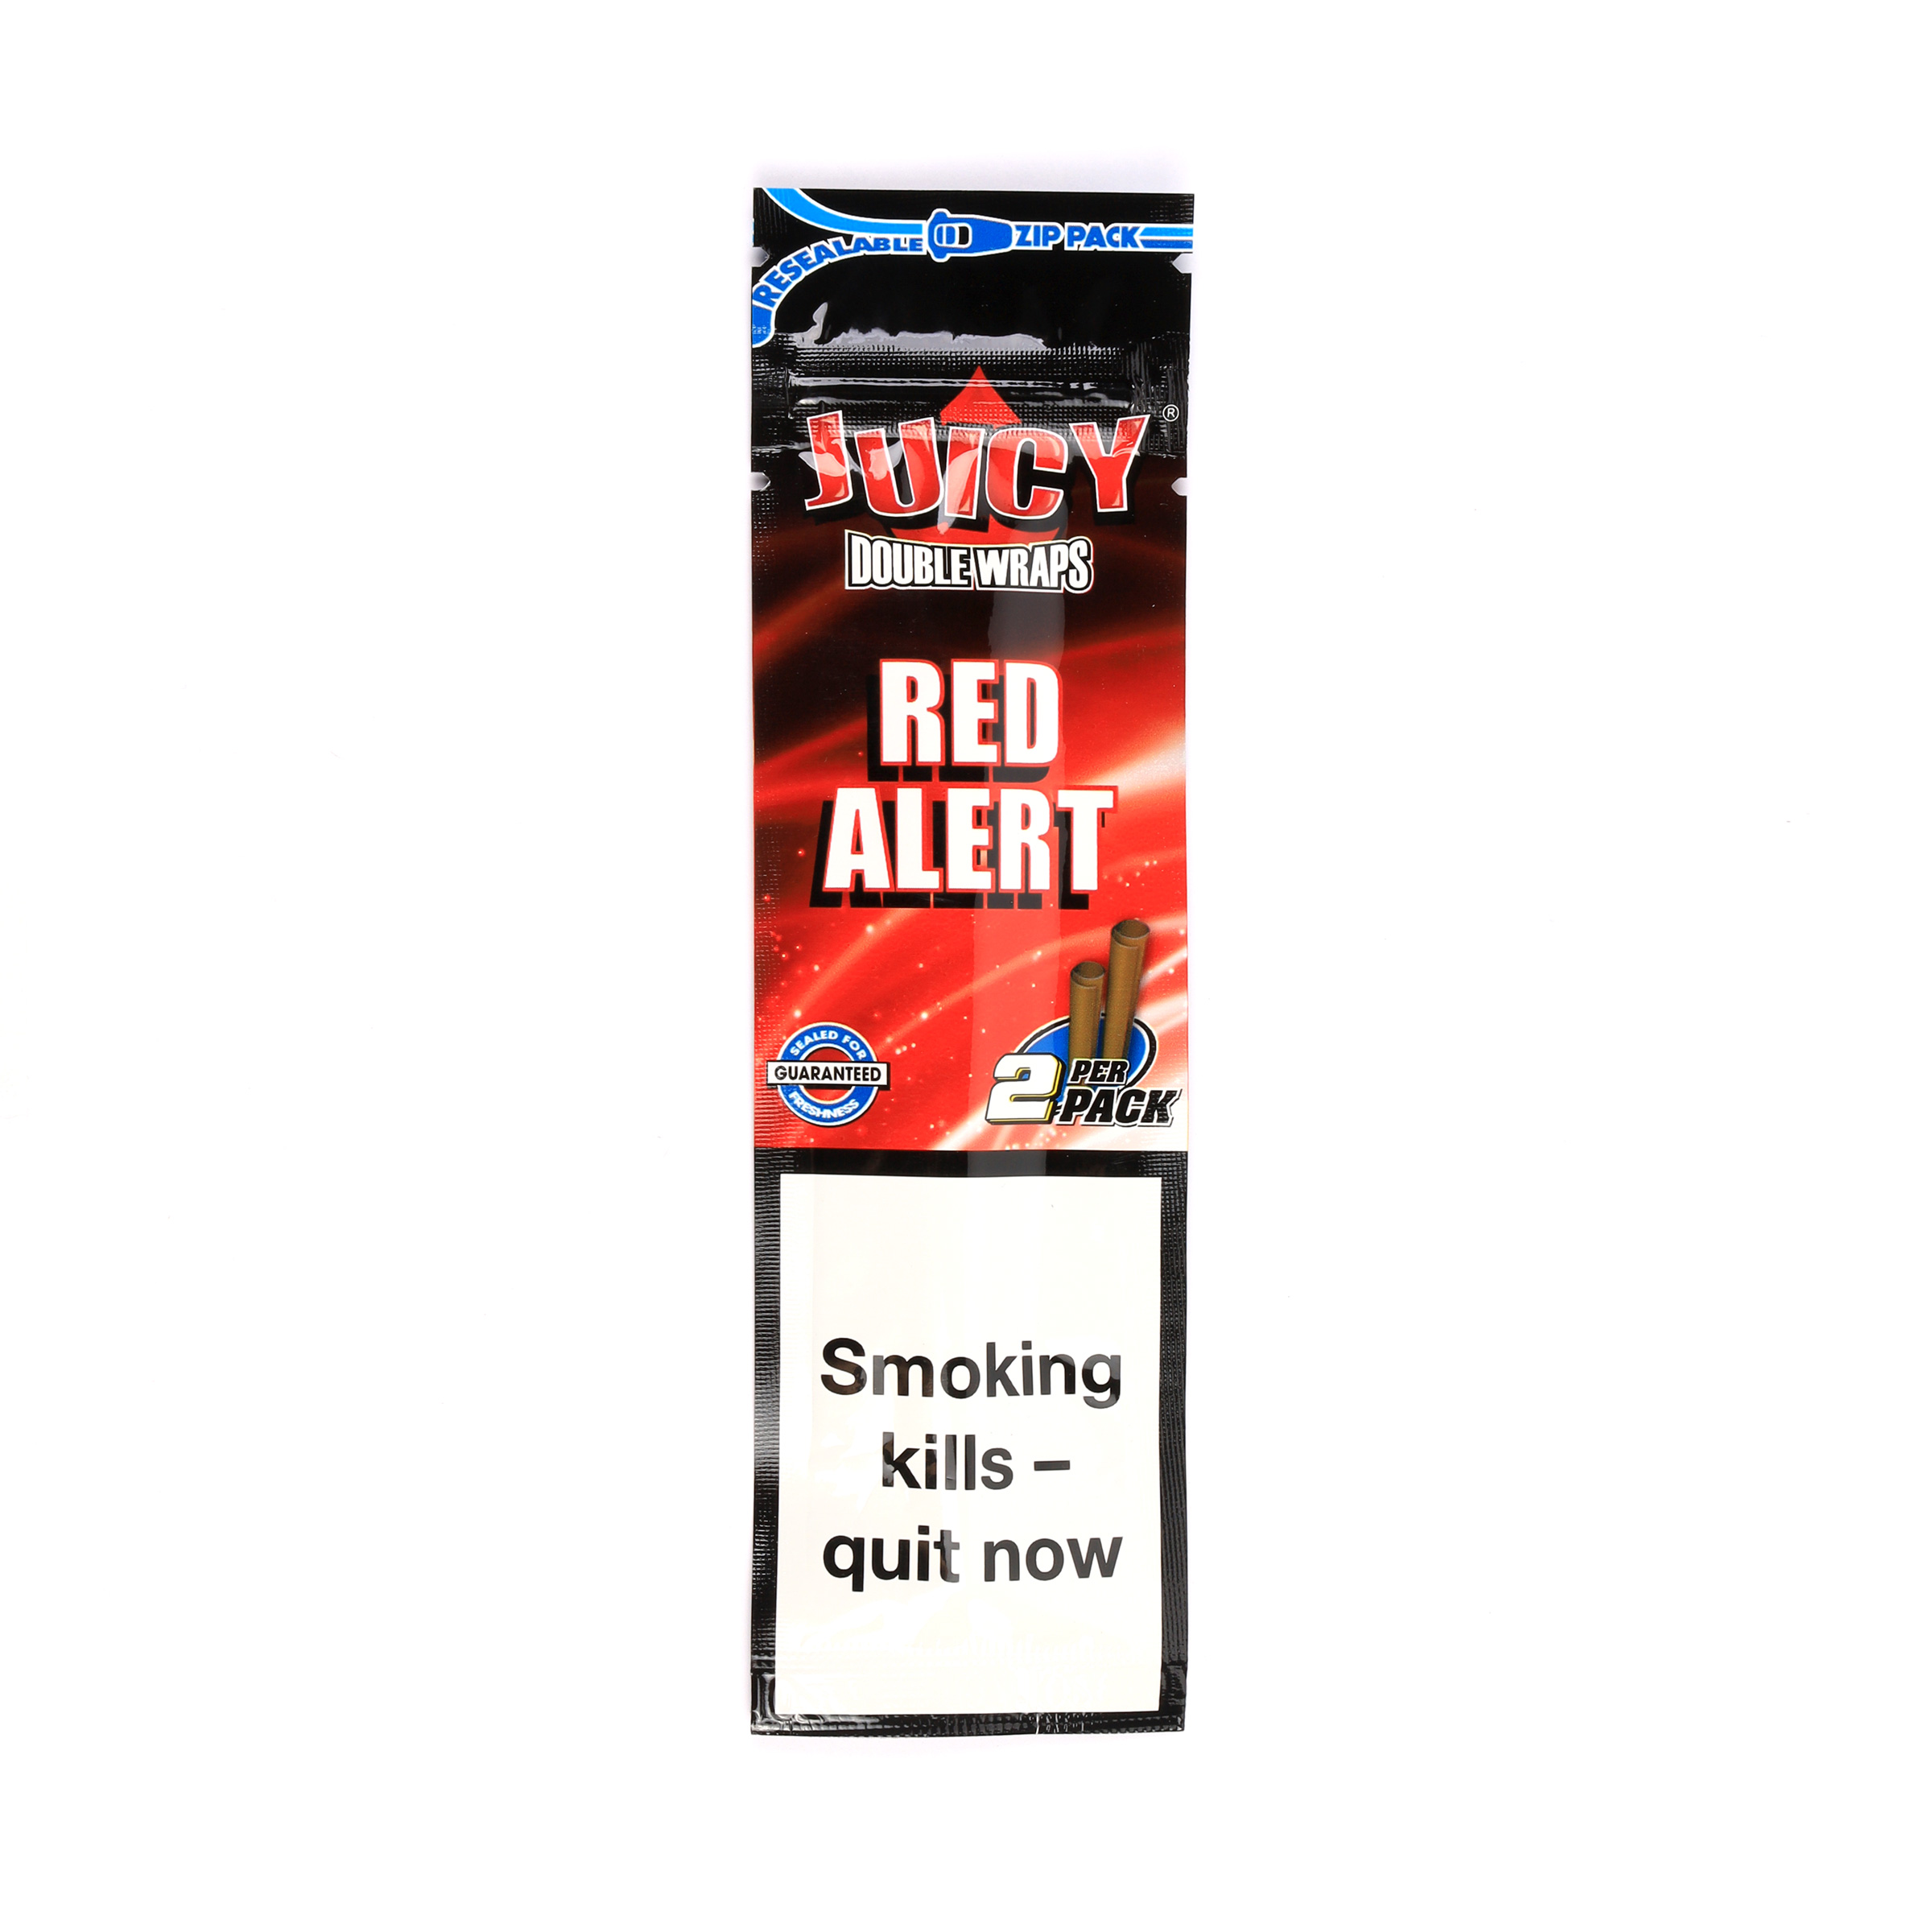 Juicy Double Blunt Wraps - Red Alert / Strawberry 2 Per Pack